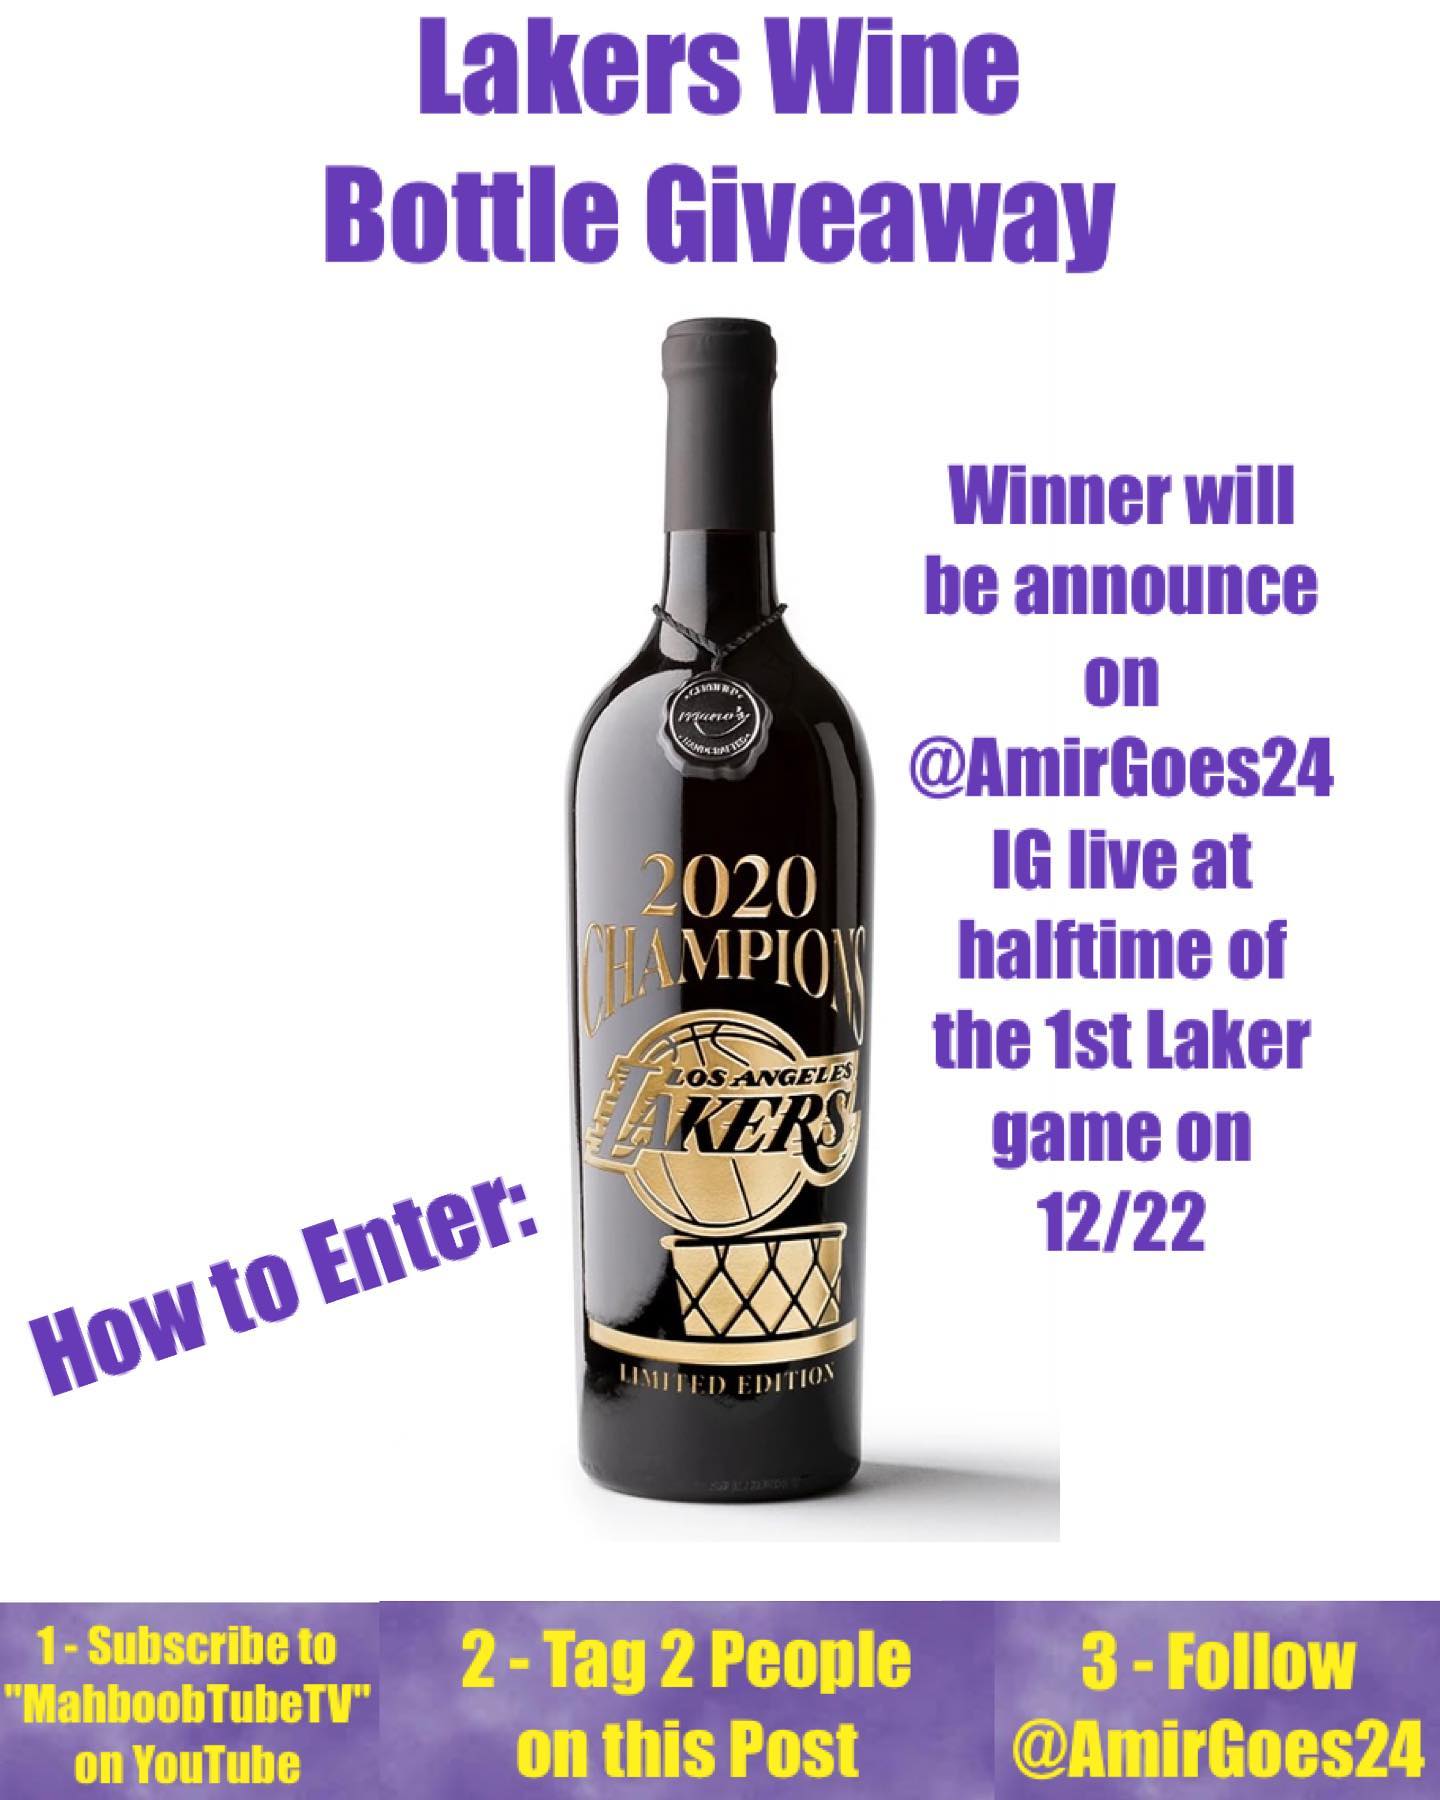 ⁣Happy 14th my Birthdayversary and our monthly Giveaway is announced! Every 14th of the month! In order to celebrate the Championship this one is for my Lakers Peoples! What a year it's been! So I'll be giving away a @manoswine Lakers Edition 2020 Championship bottle! Hers how to enter: (1) Subscribe to MahboobTubeTV on YouTube (2) Tag 2 people on this Post (3) Follow AmirGoes24 on IG! Do all 3 and you are entered! Drawing will be at halftime of the Lakers 1st season Game , 12/22, right here on my IG live 
.⁣
.⁣
.⁣
.⁣
.⁣